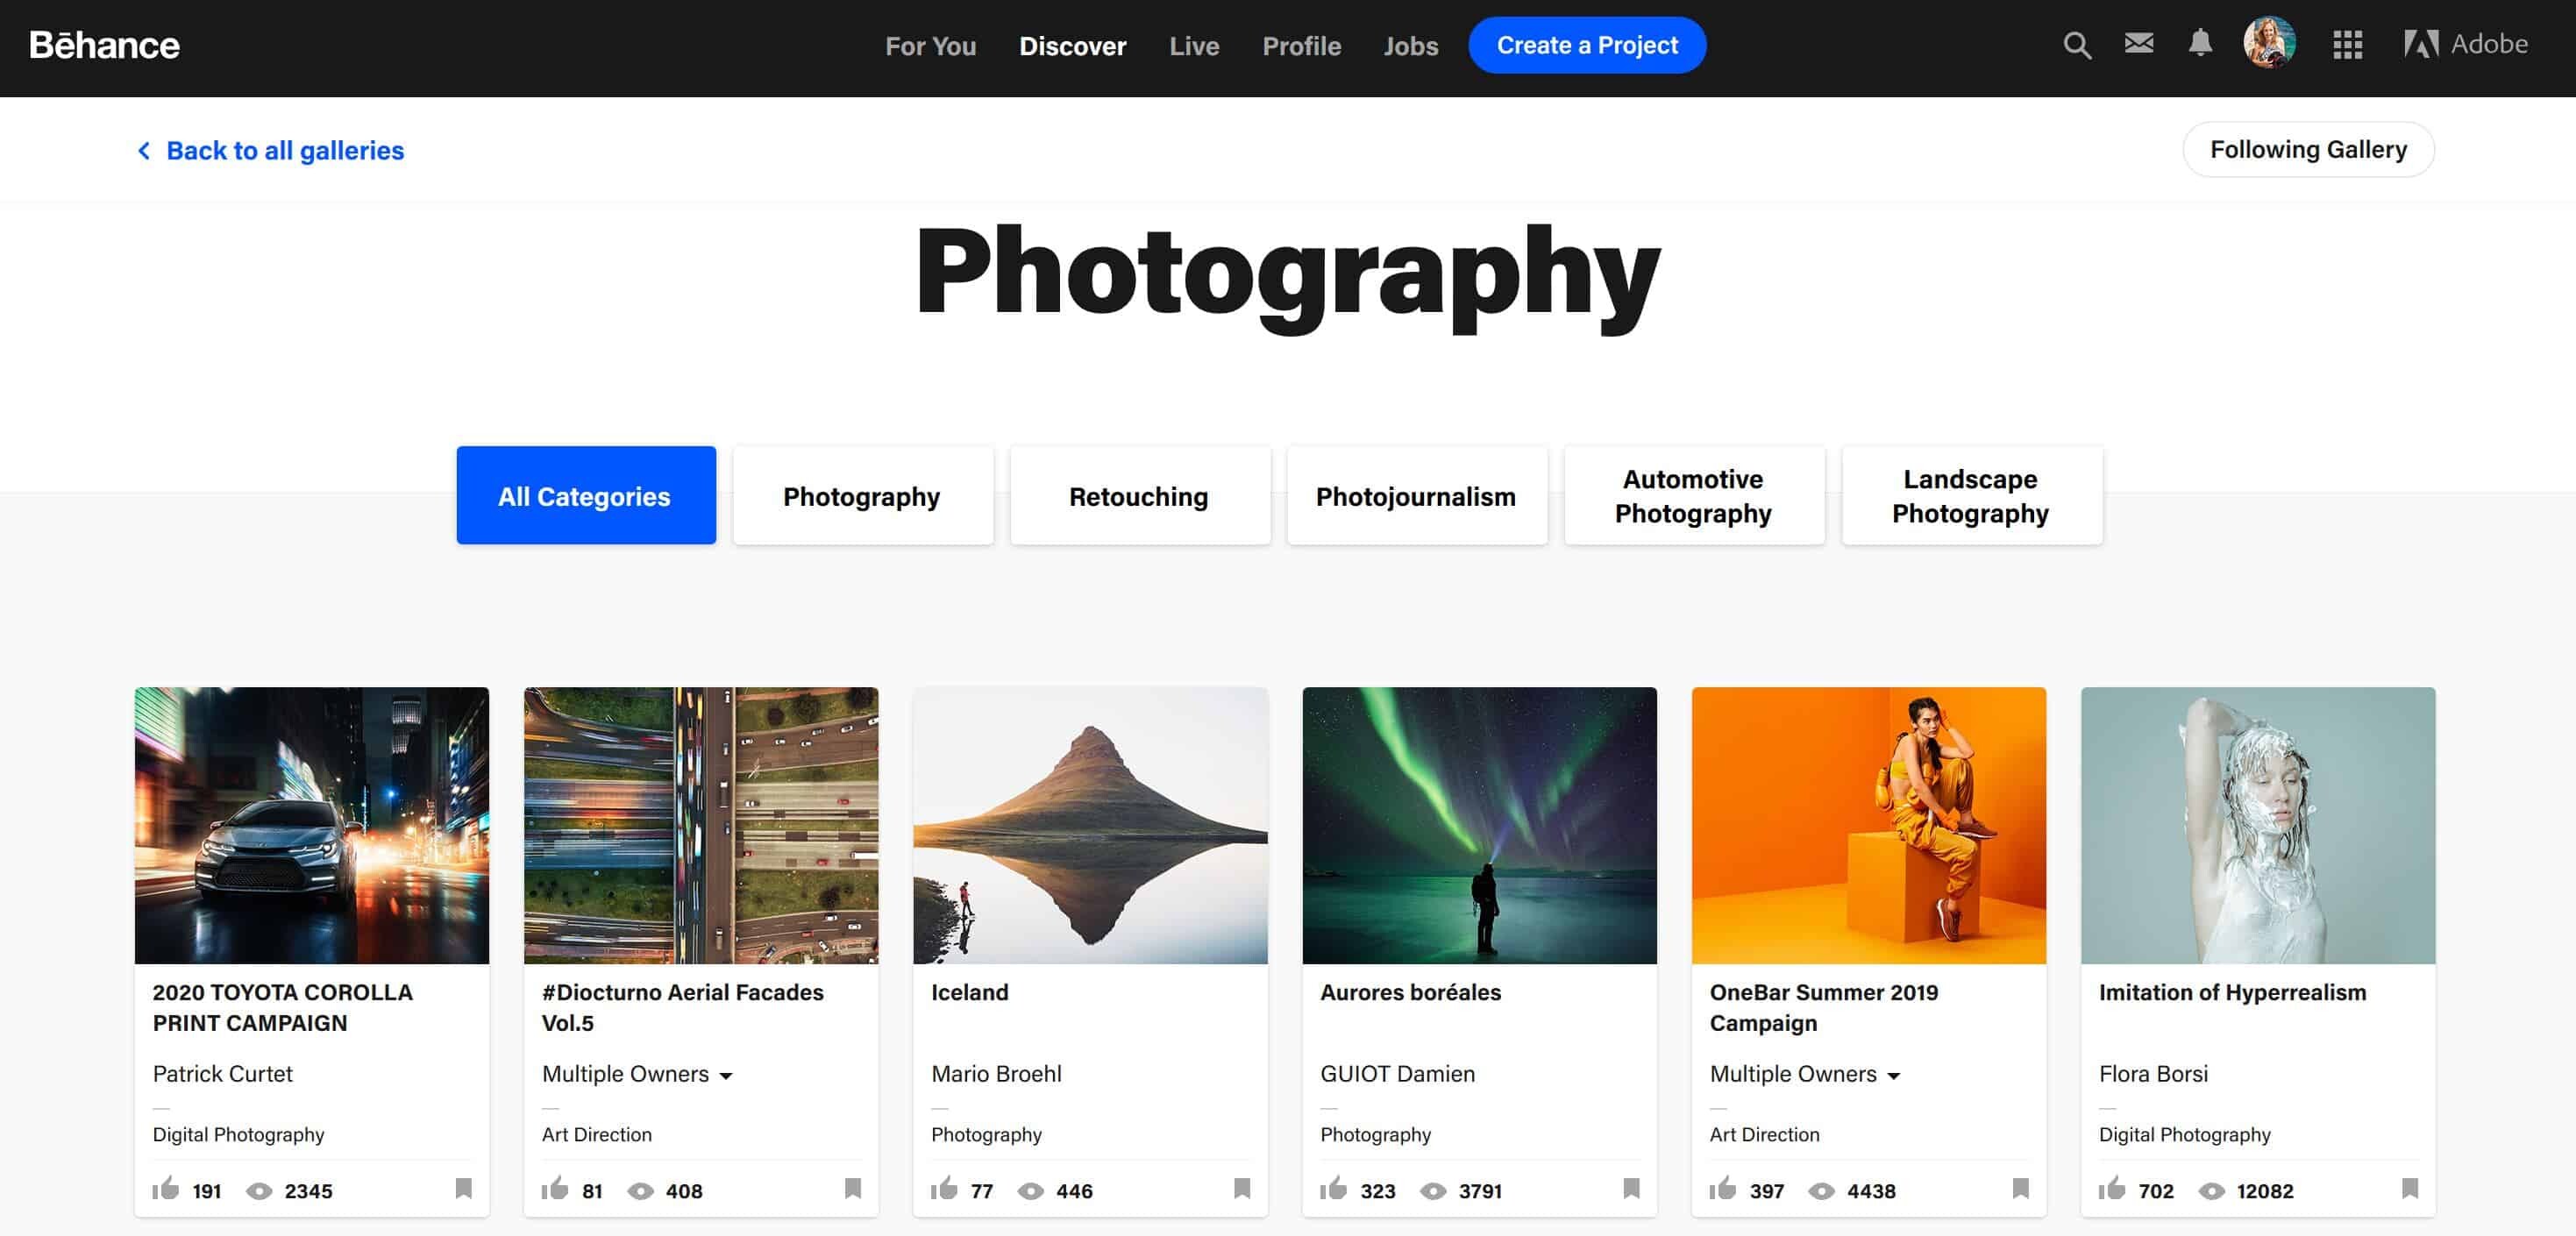 Behance by Adobe - Social Media for Photographers